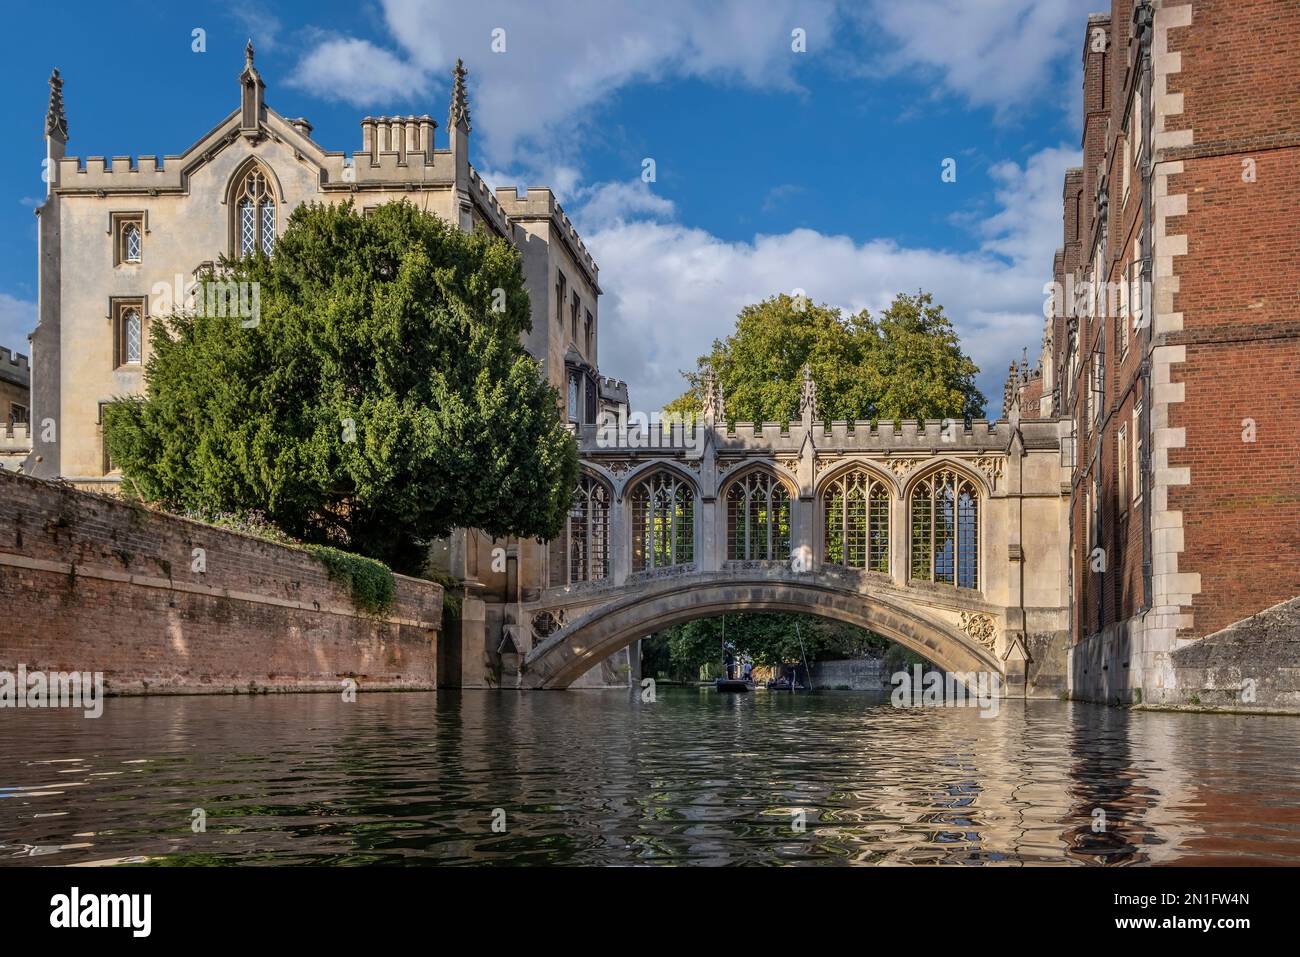 Bridge of Sighs and St. Johns College from the River Cam, Cambridge University, Cambridge, Cambridgeshire, England, United Kingdom, Europe Stock Photo